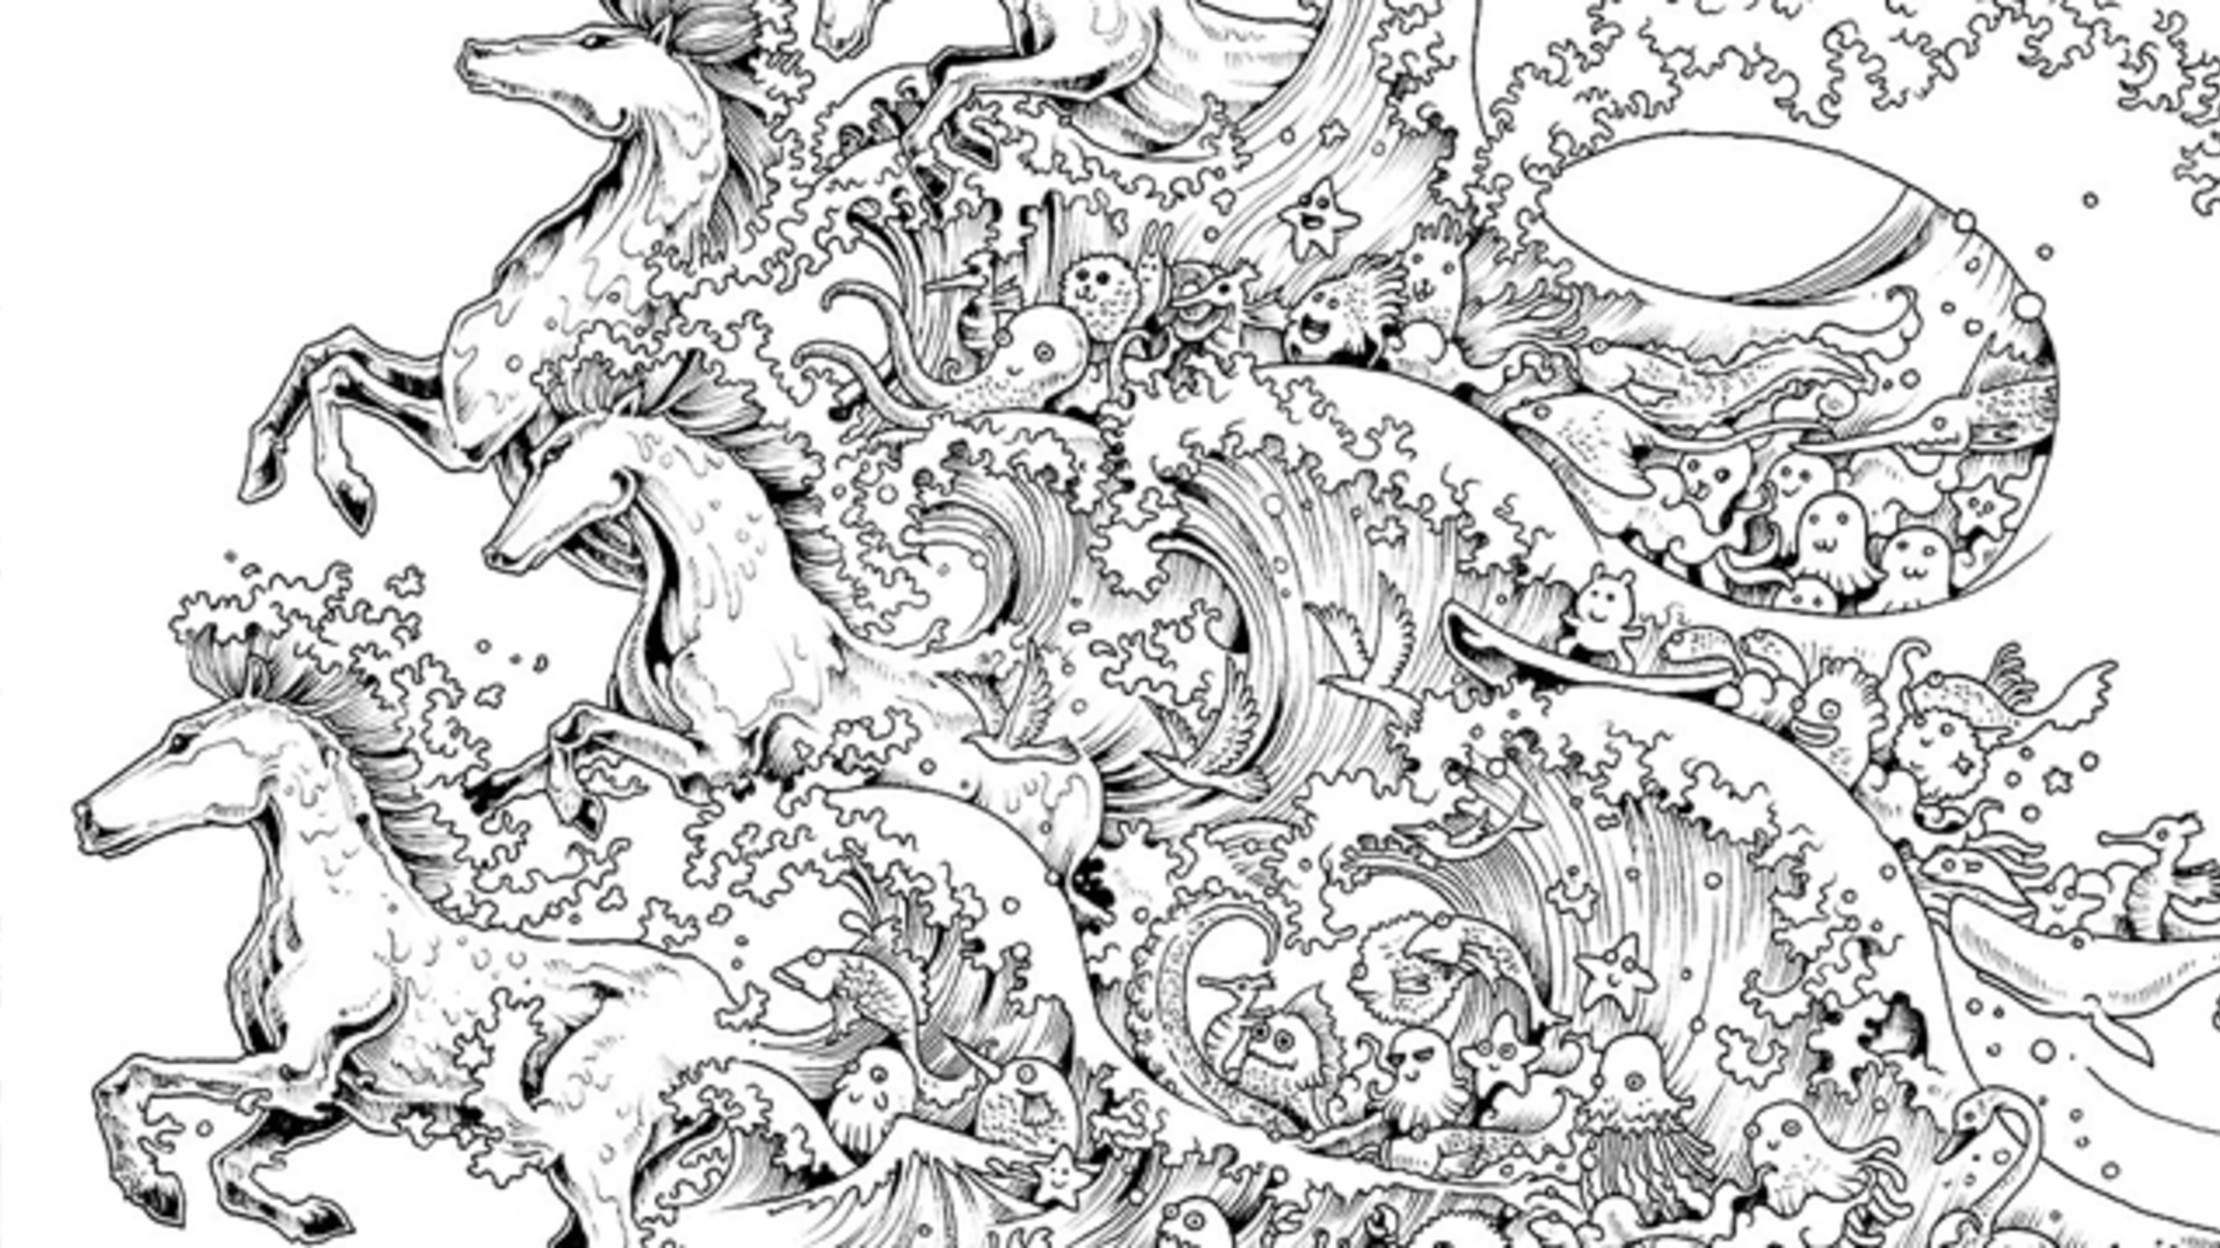 Adult Coloring Book Images
 10 Intricate Adult Coloring Books to Help You De Stress